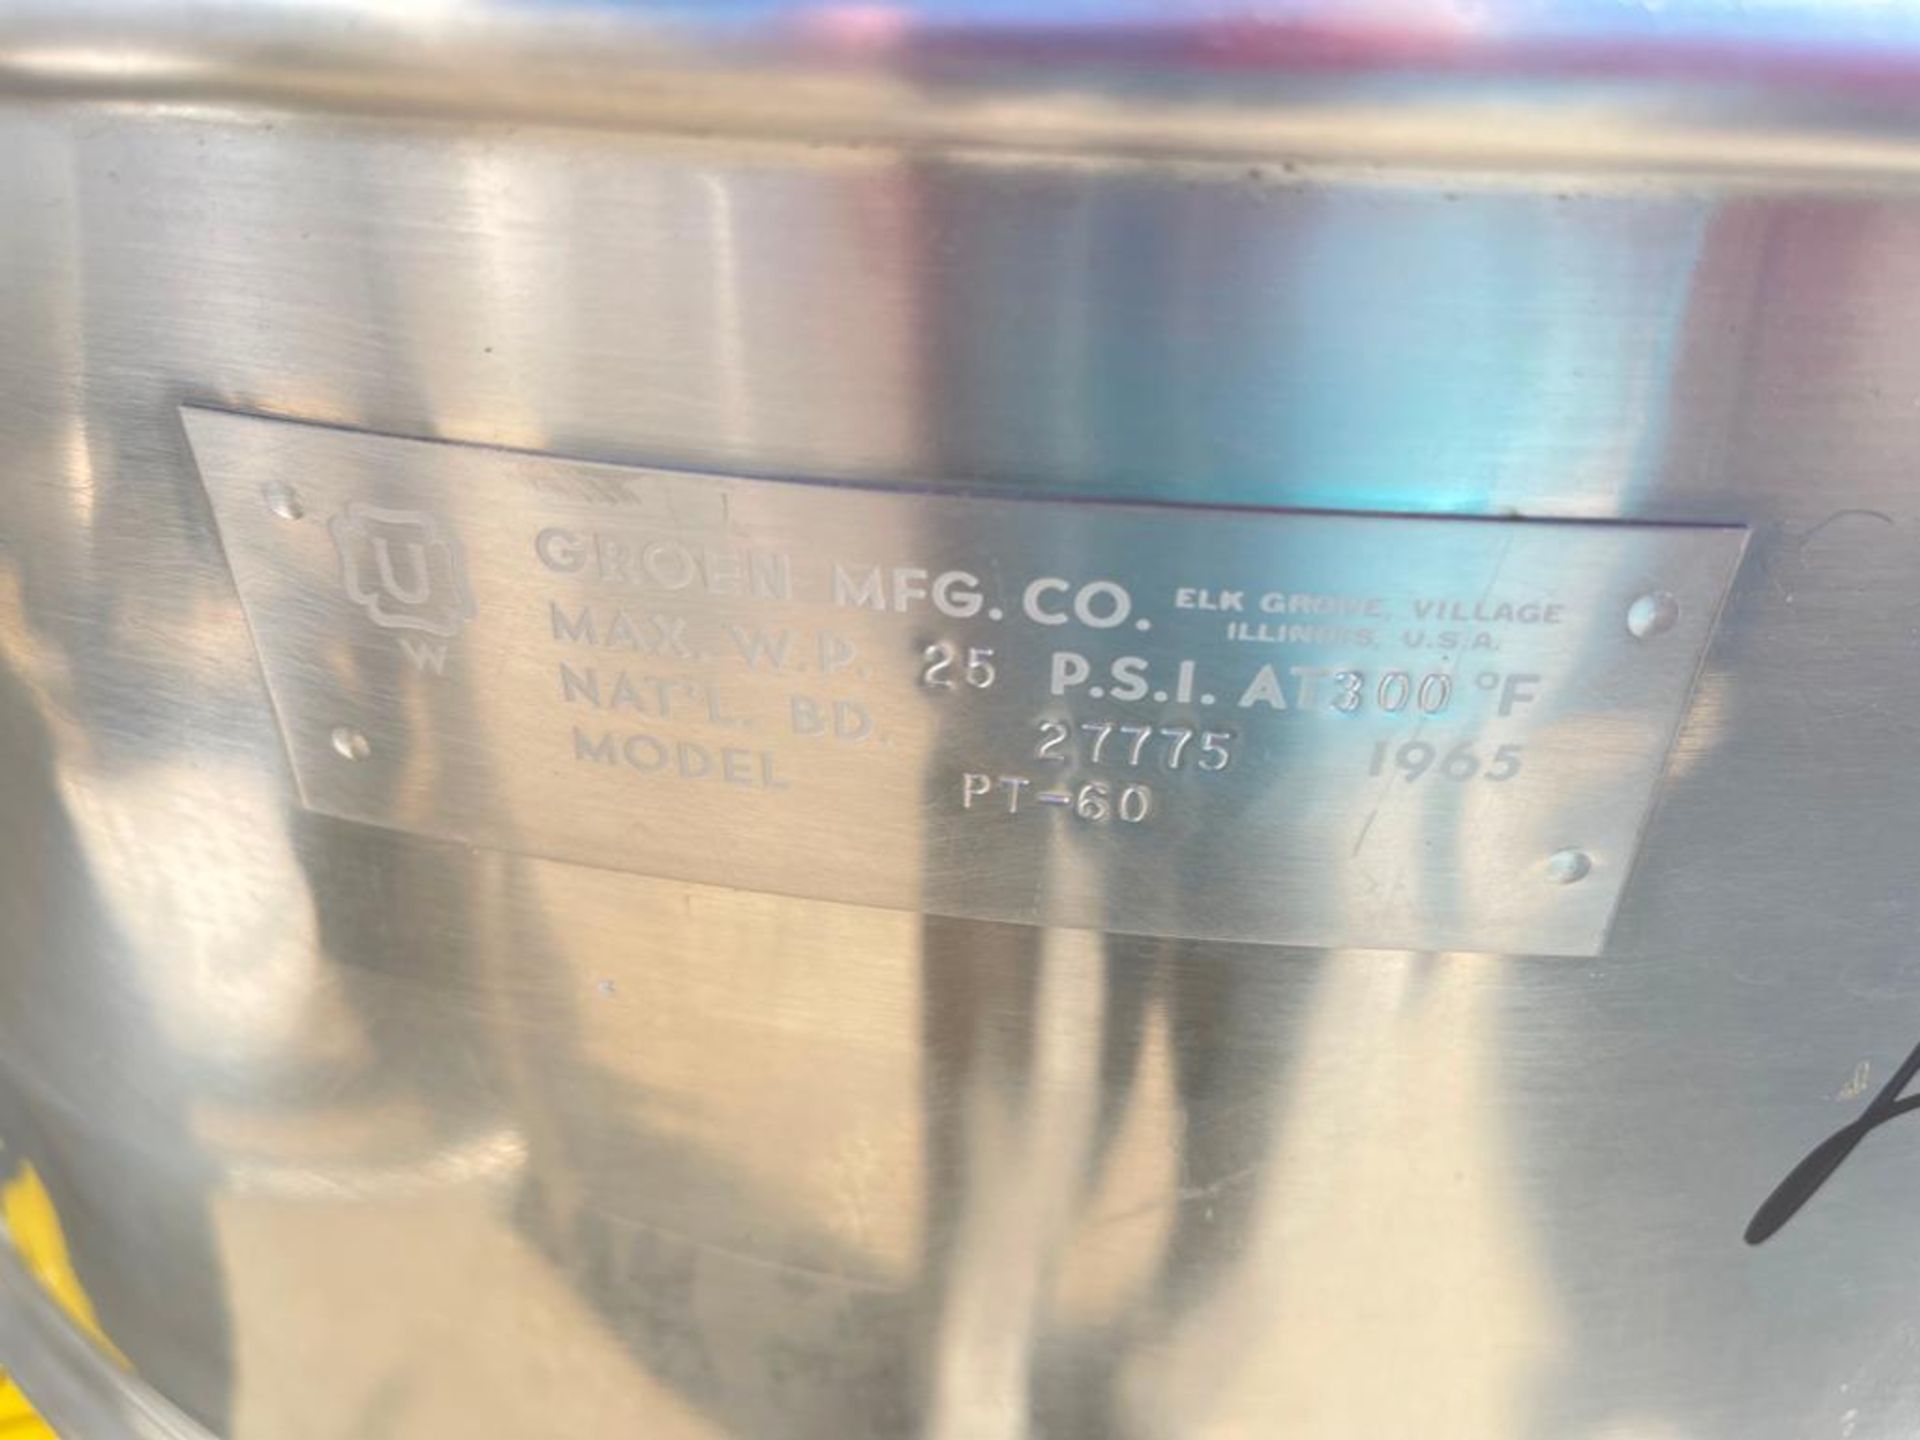 Groen 60 Gallon Jacketed S/S Kettle, Model: PT-60, N.B. No.: 27775 - Rigging Fees: $100 - Image 2 of 2